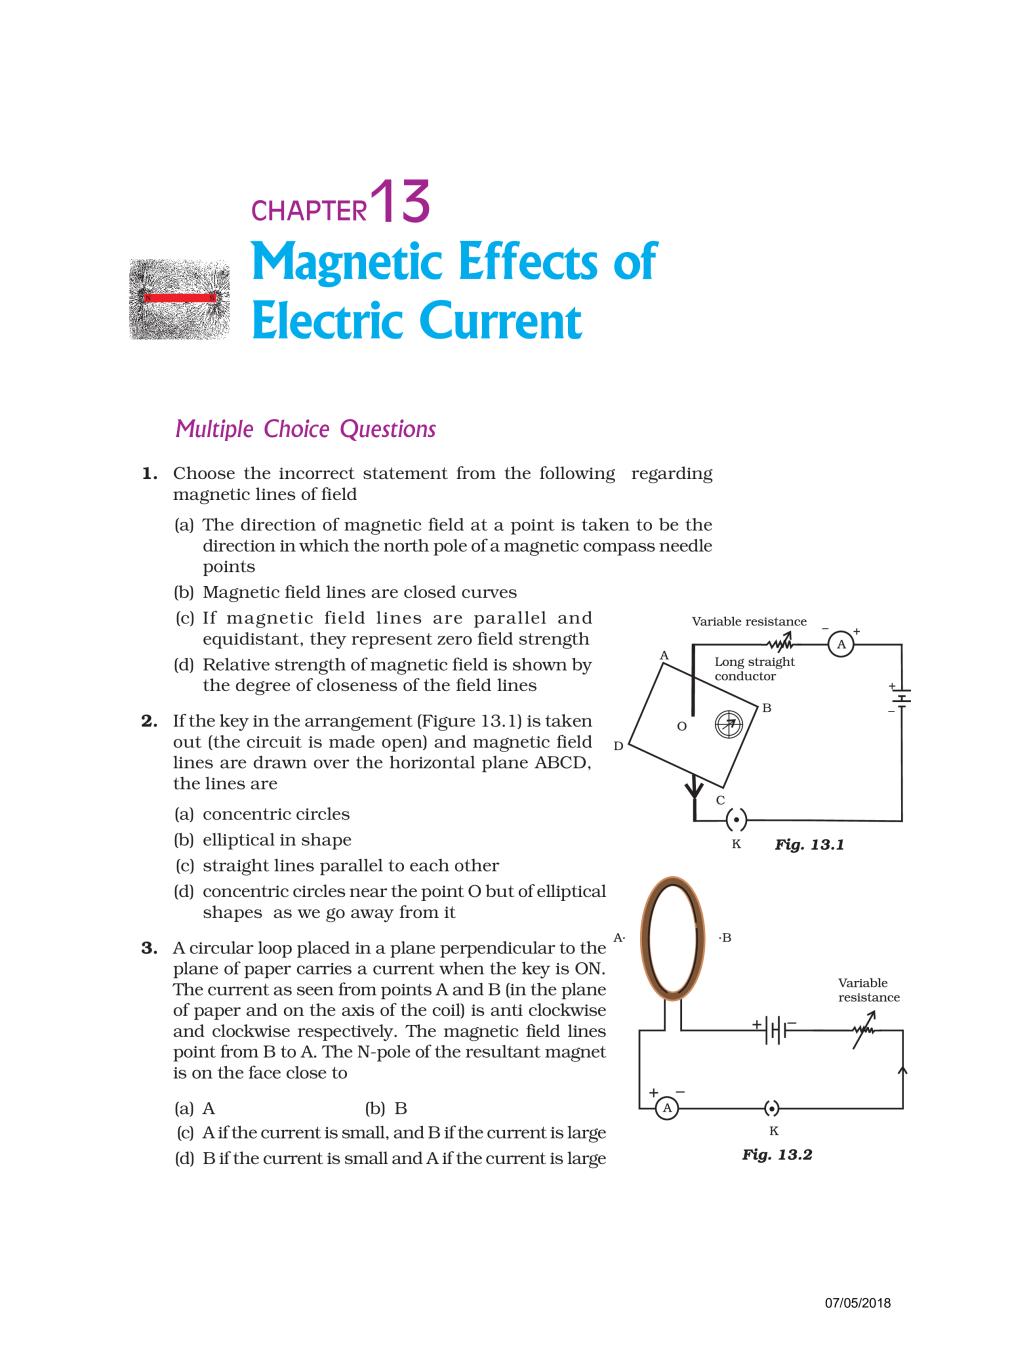 NCERT Exemplar Class 10 Science Unit 13 Magnetic Effects of Electric Current - Page 1